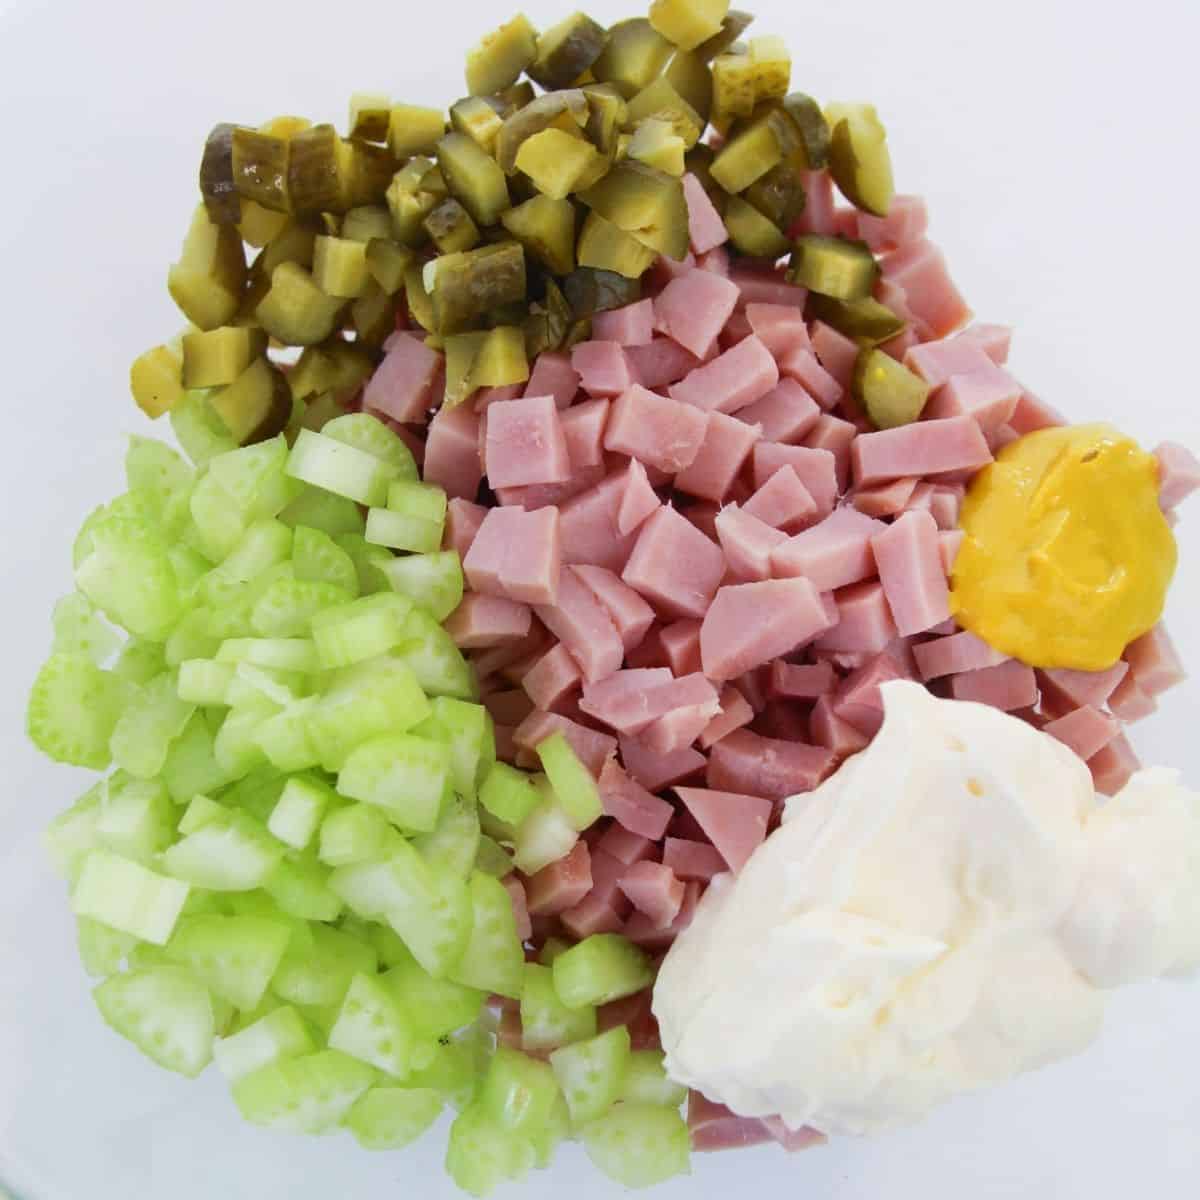 Diced ham, pickles, celery, mayo, mustard in a bowl to make ham salad.